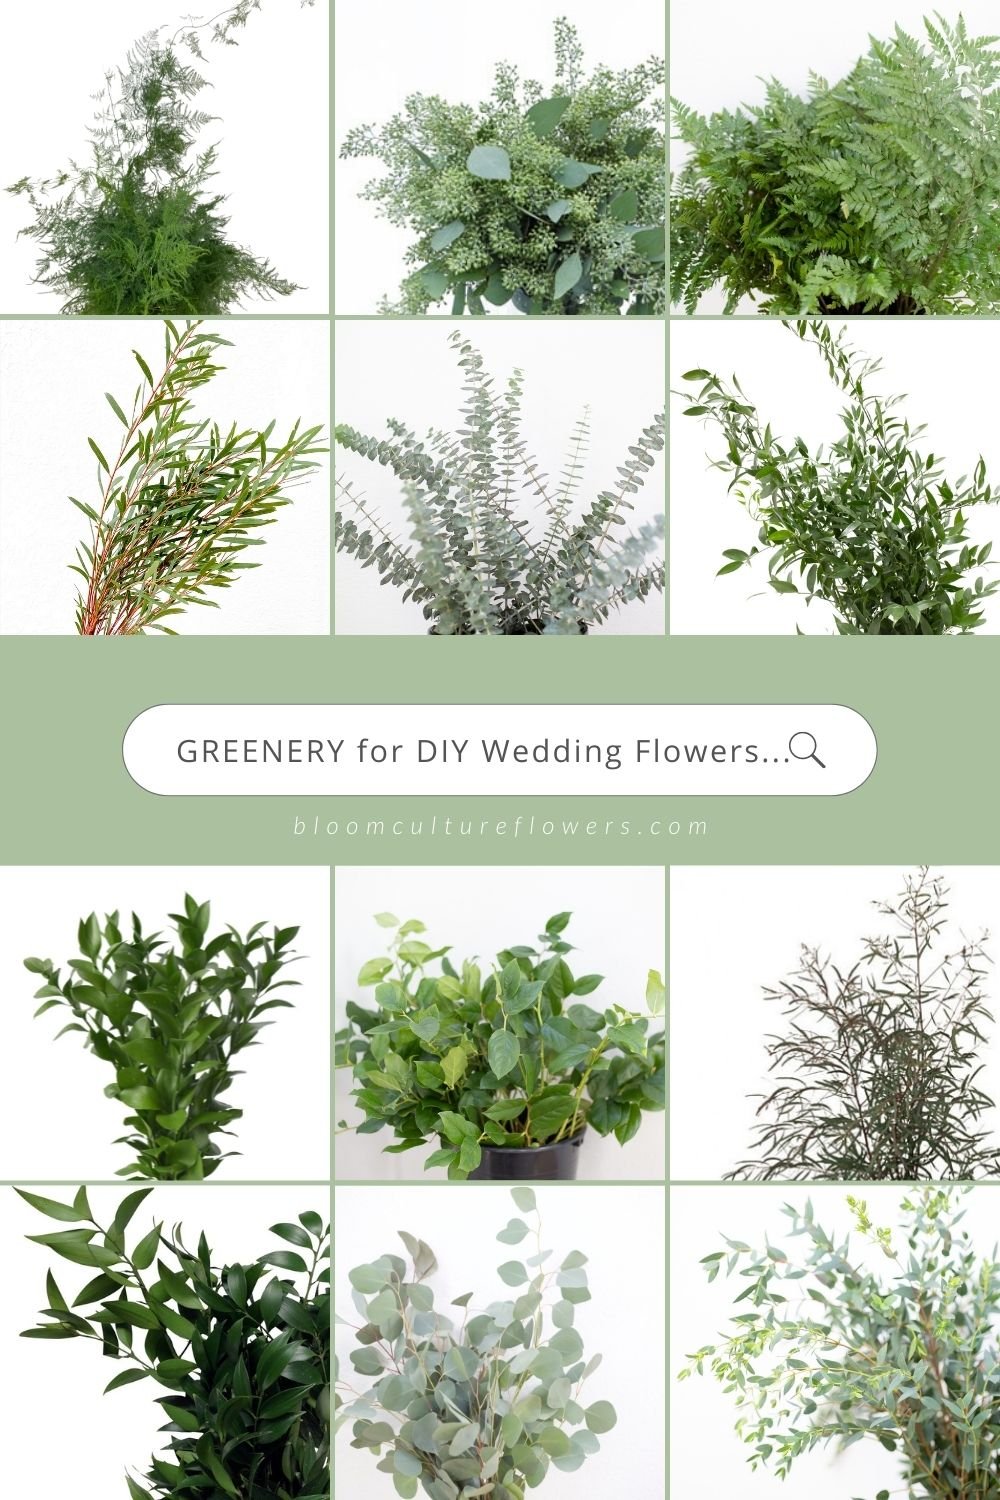 Top 10 Types of Greenery to Use for Your DIY Wedding Flowers